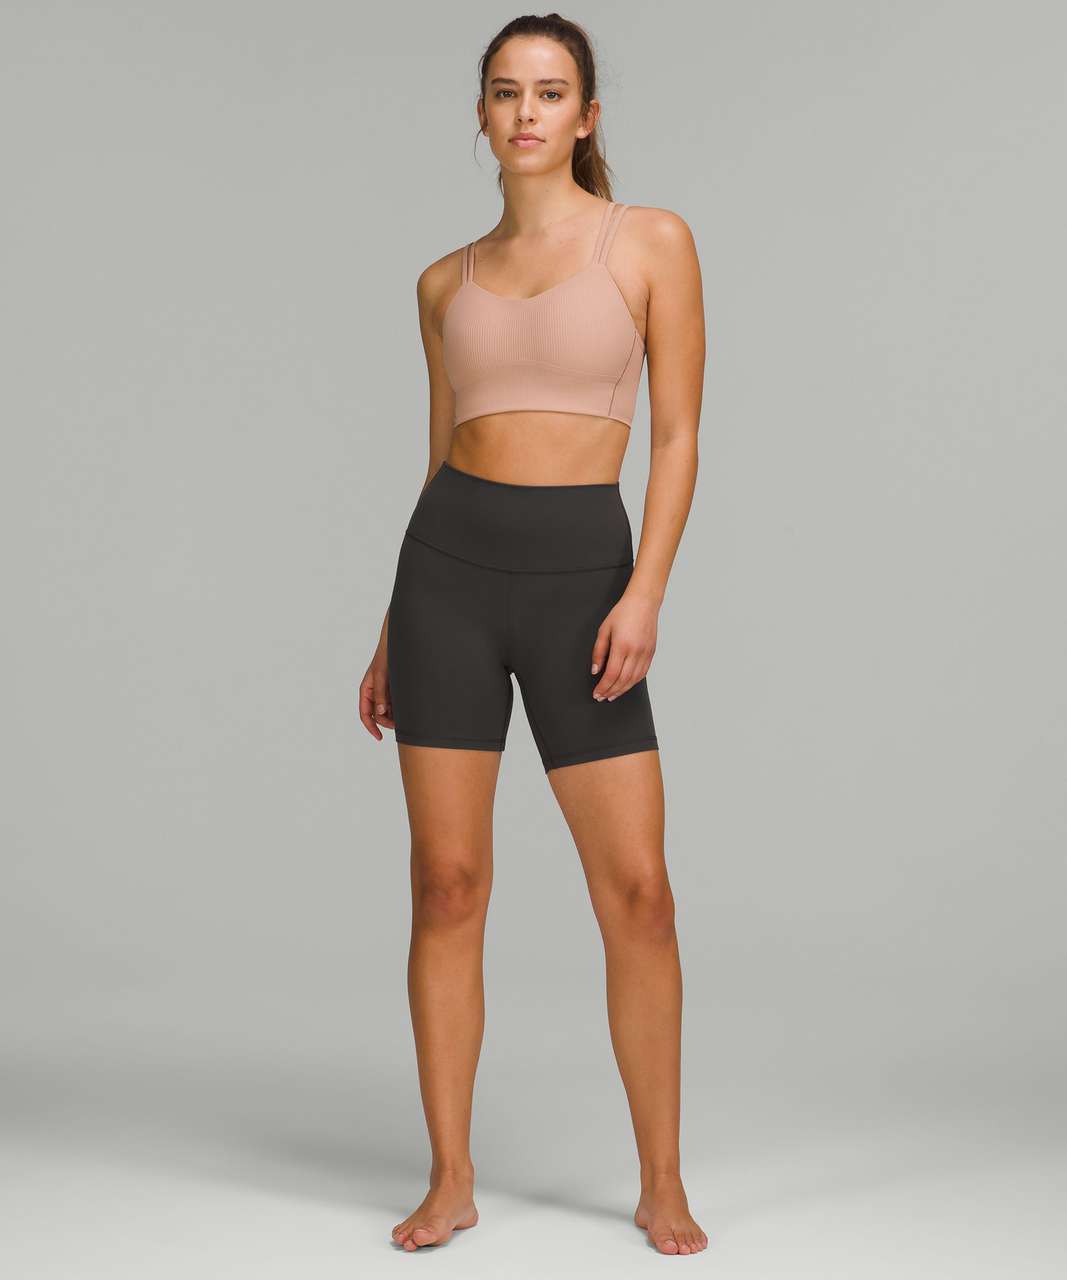 Lululemon Like a Cloud Ribbed Longline Bra *Light Support, B/C Cup - Pink Clay